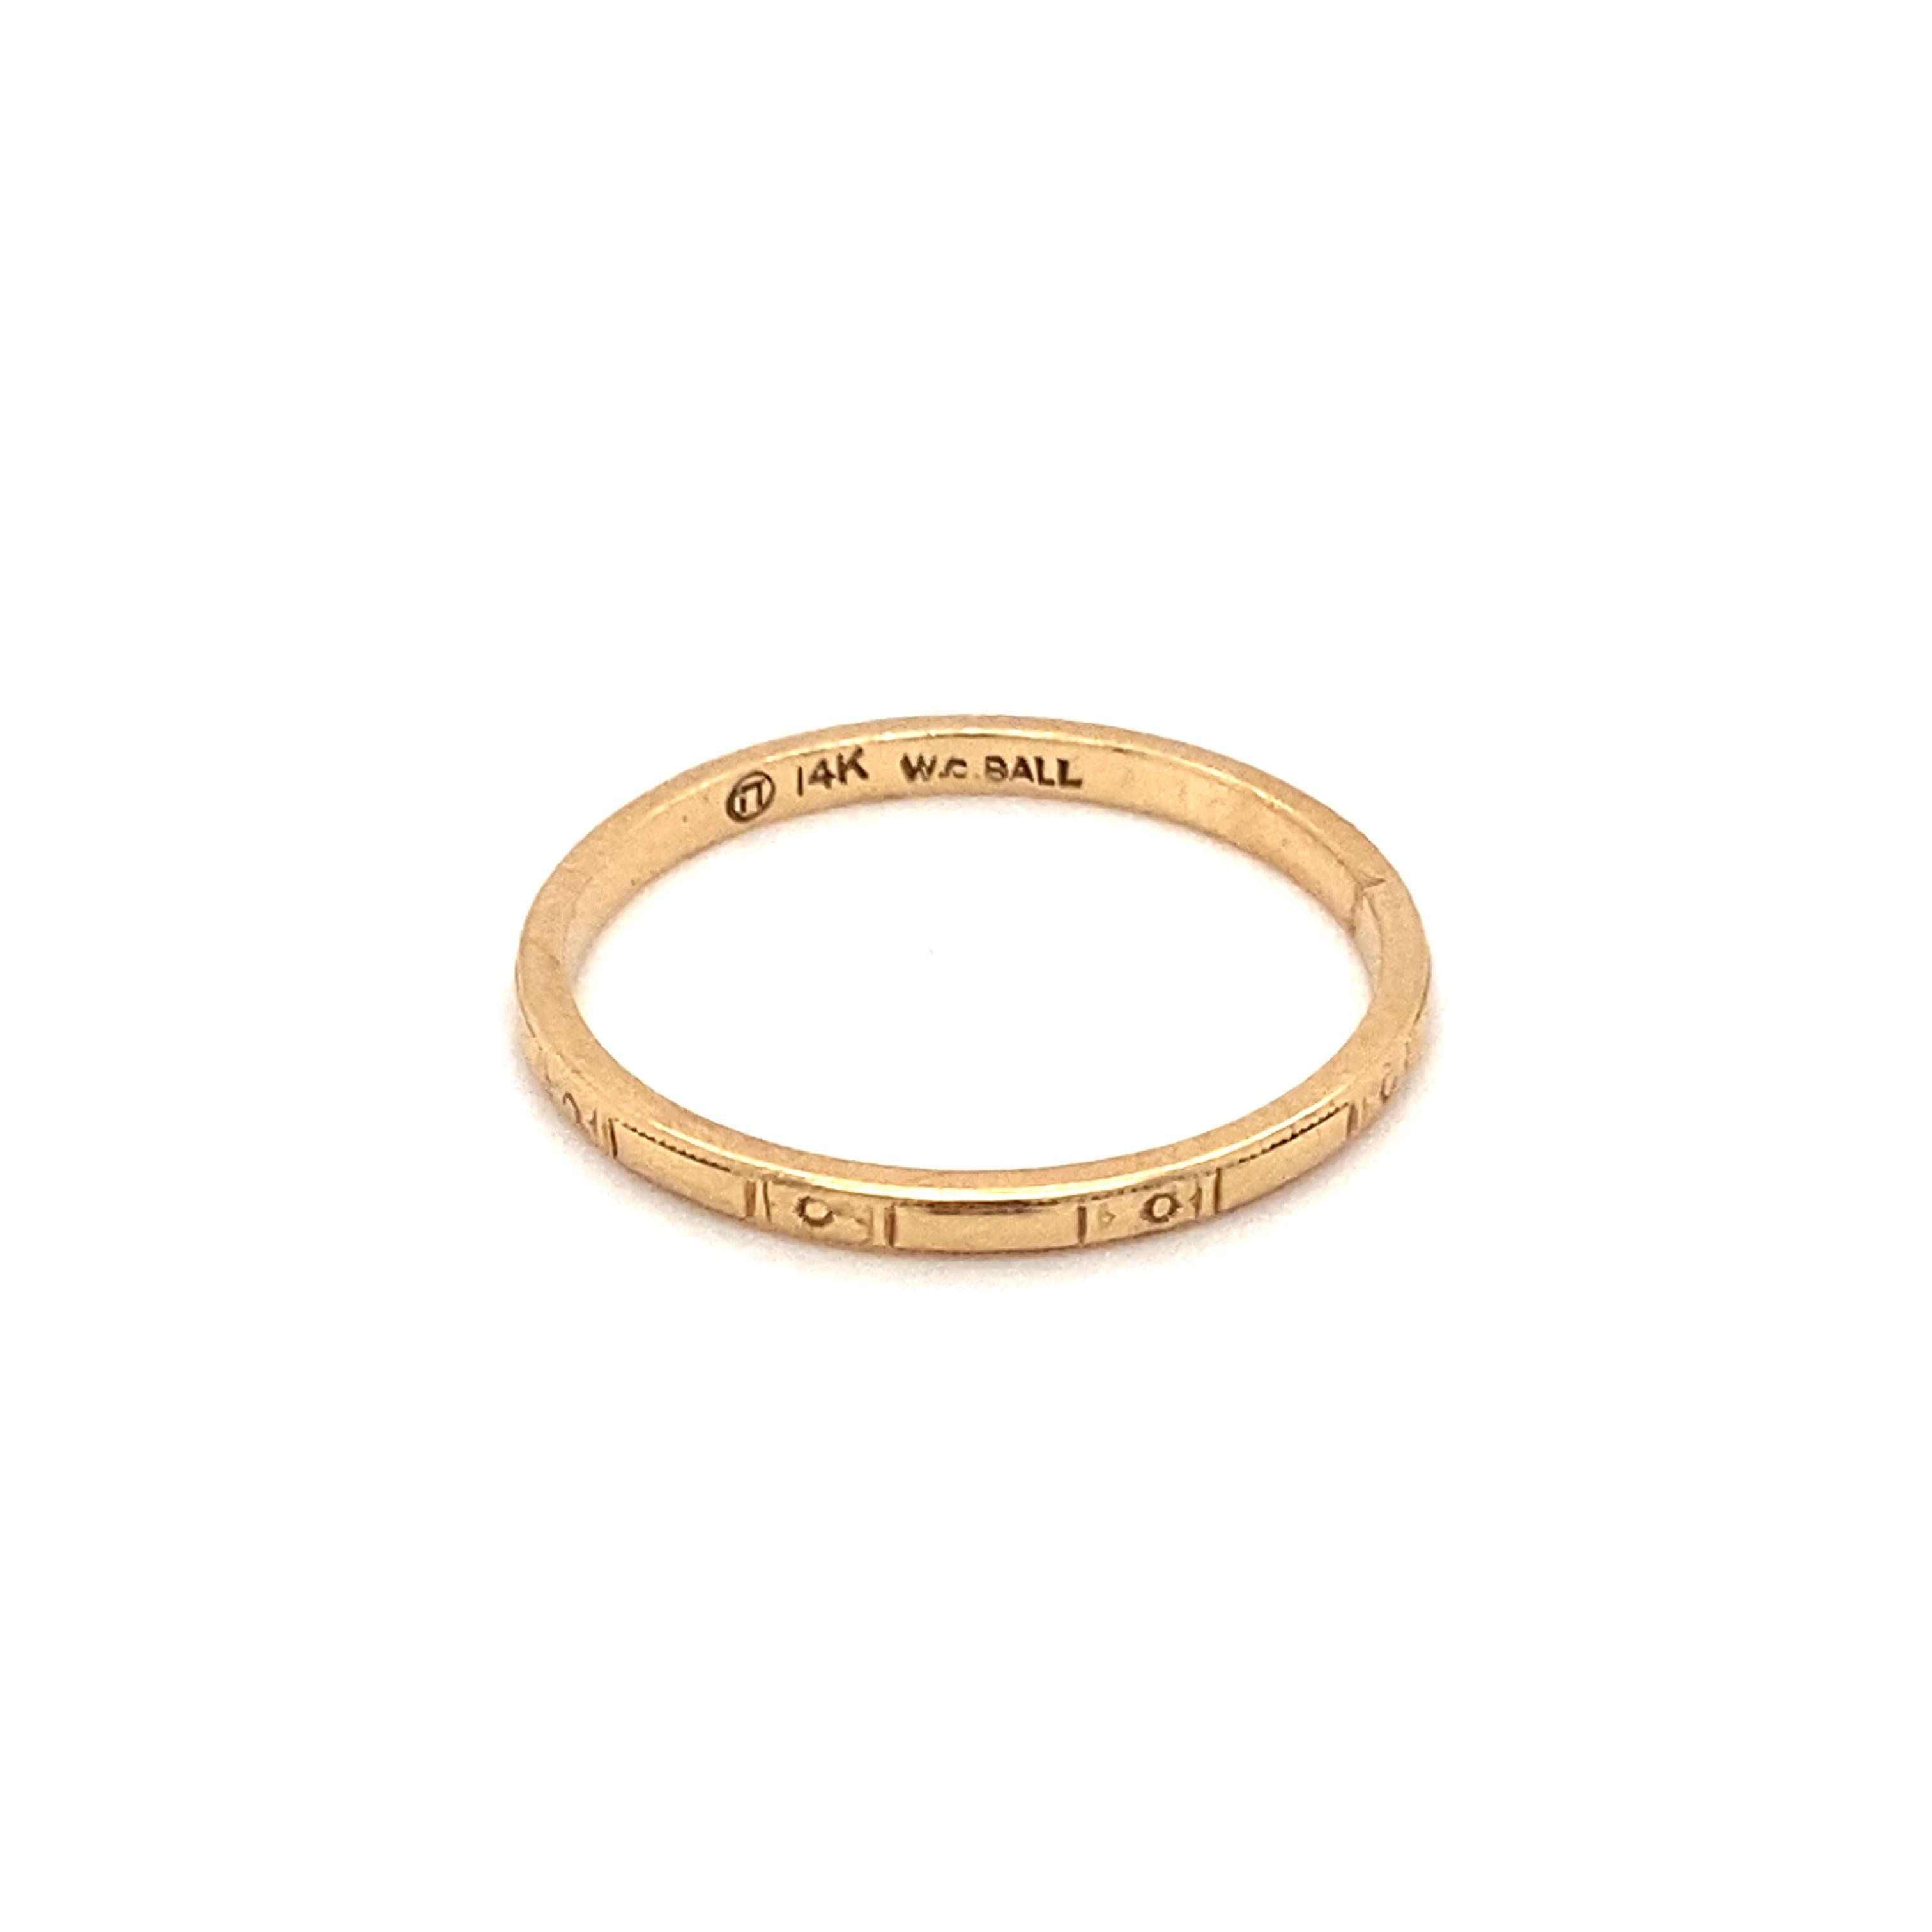 Item Details:
Metal type: 14 Karat Yellow Gold 
Weight: 1.5 grams 
Size: 7.5, resizable

Item Features:
This simple yet elegant Art Deco band ring dates back to 1920s. This ring is very well made and in great condition with beautiful etched design